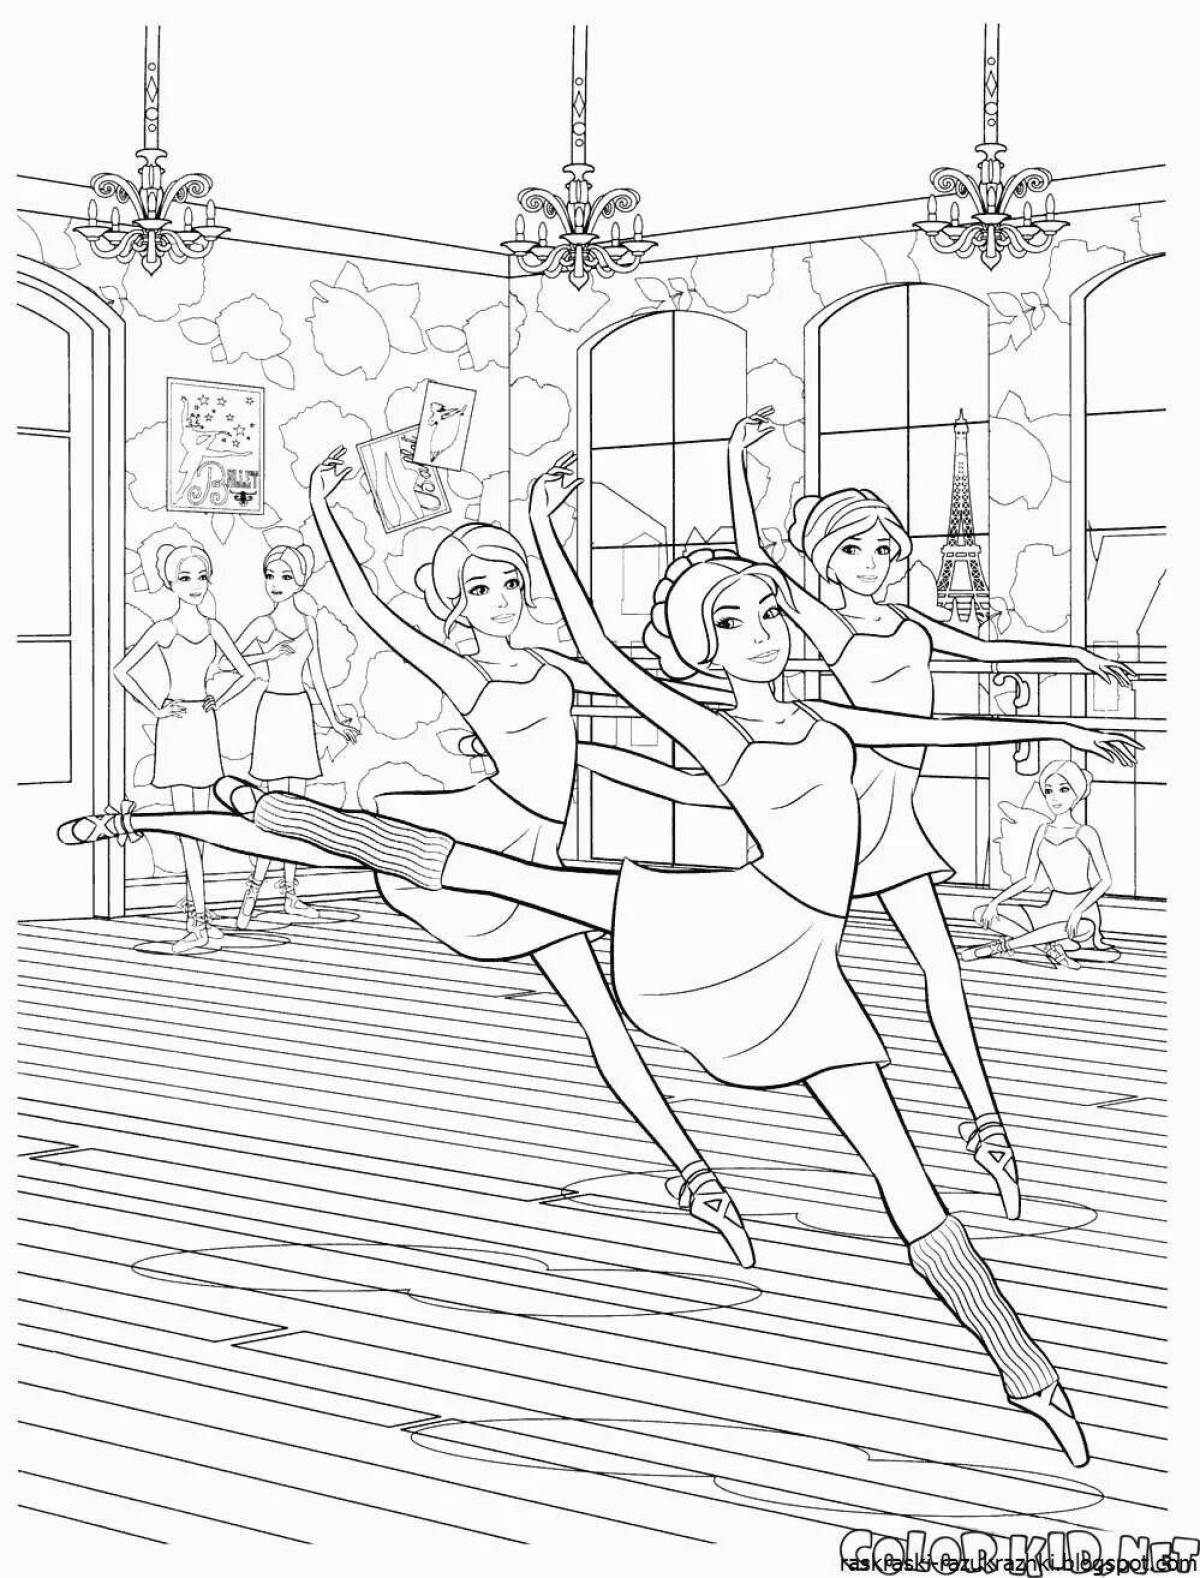 Coloring page bewitching dancer